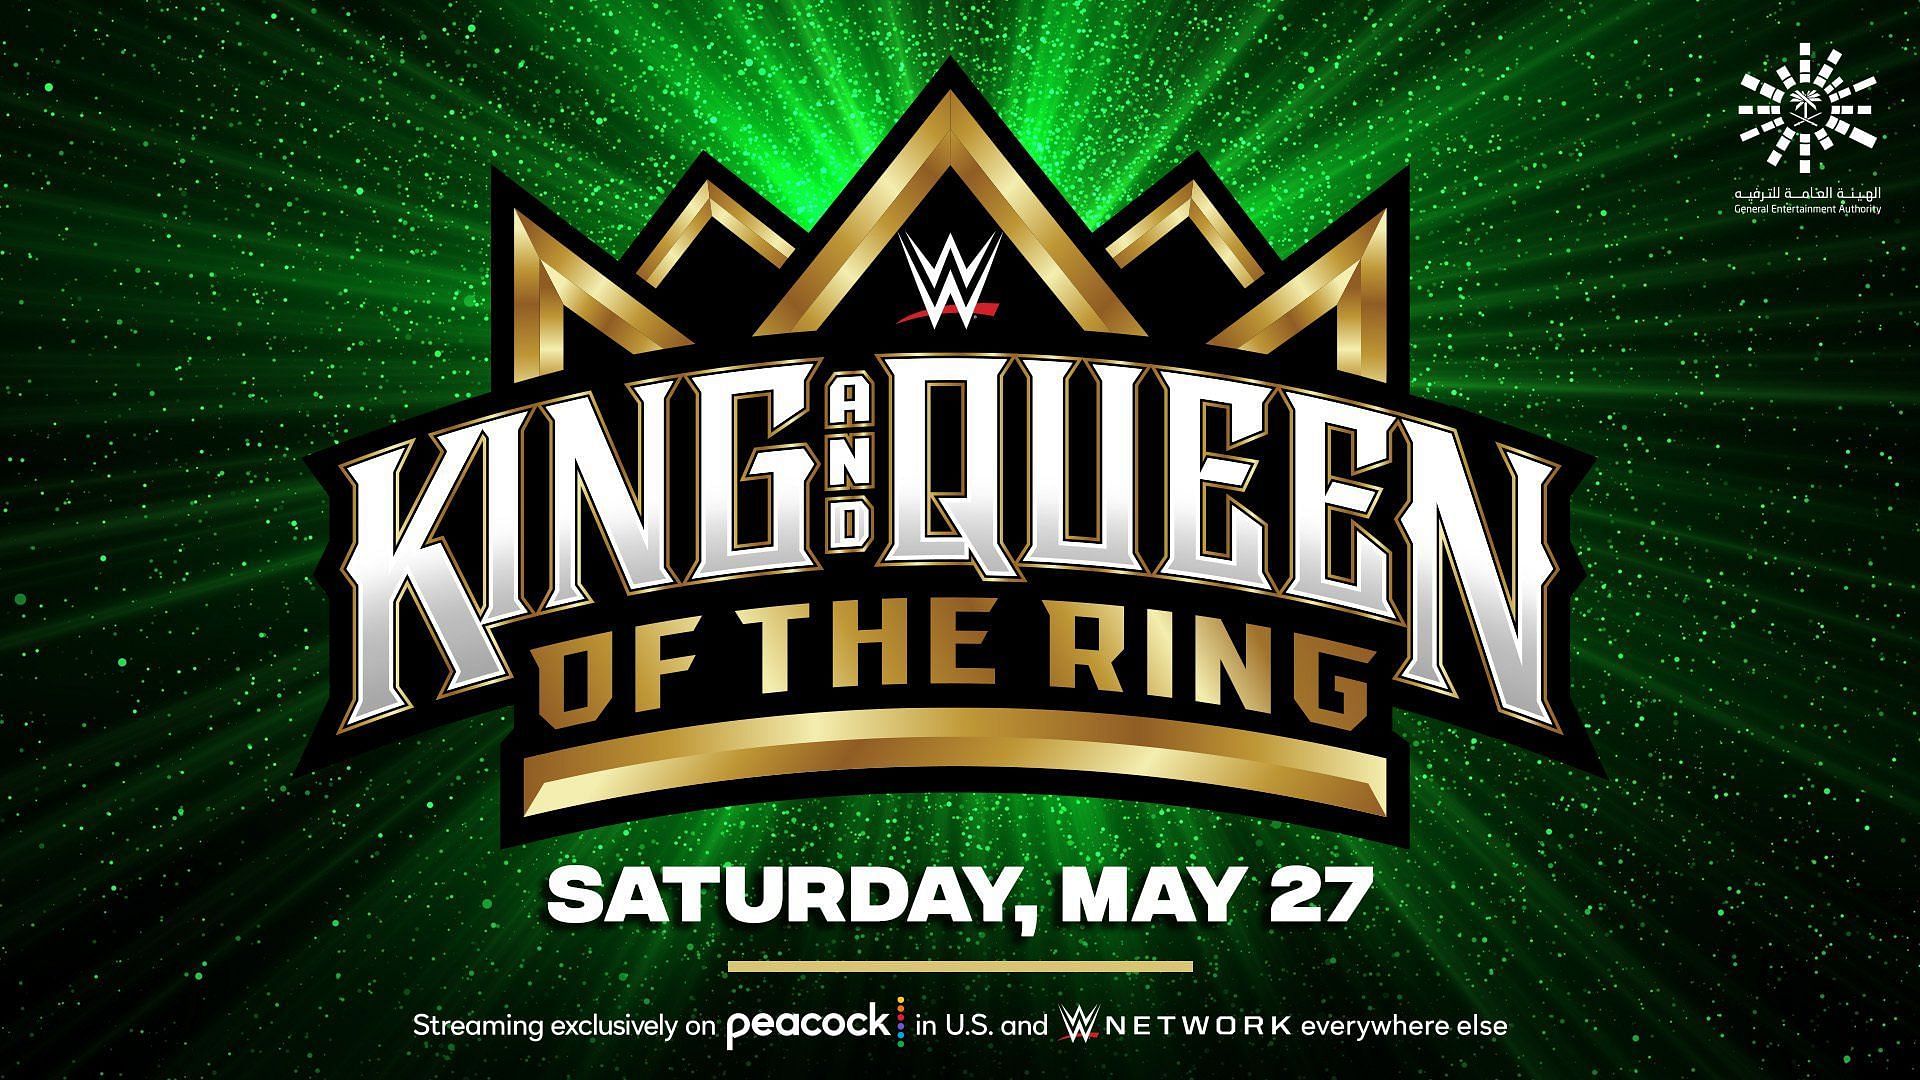 The official logo for the inaugural WWE King and Queen of the Ring PLE